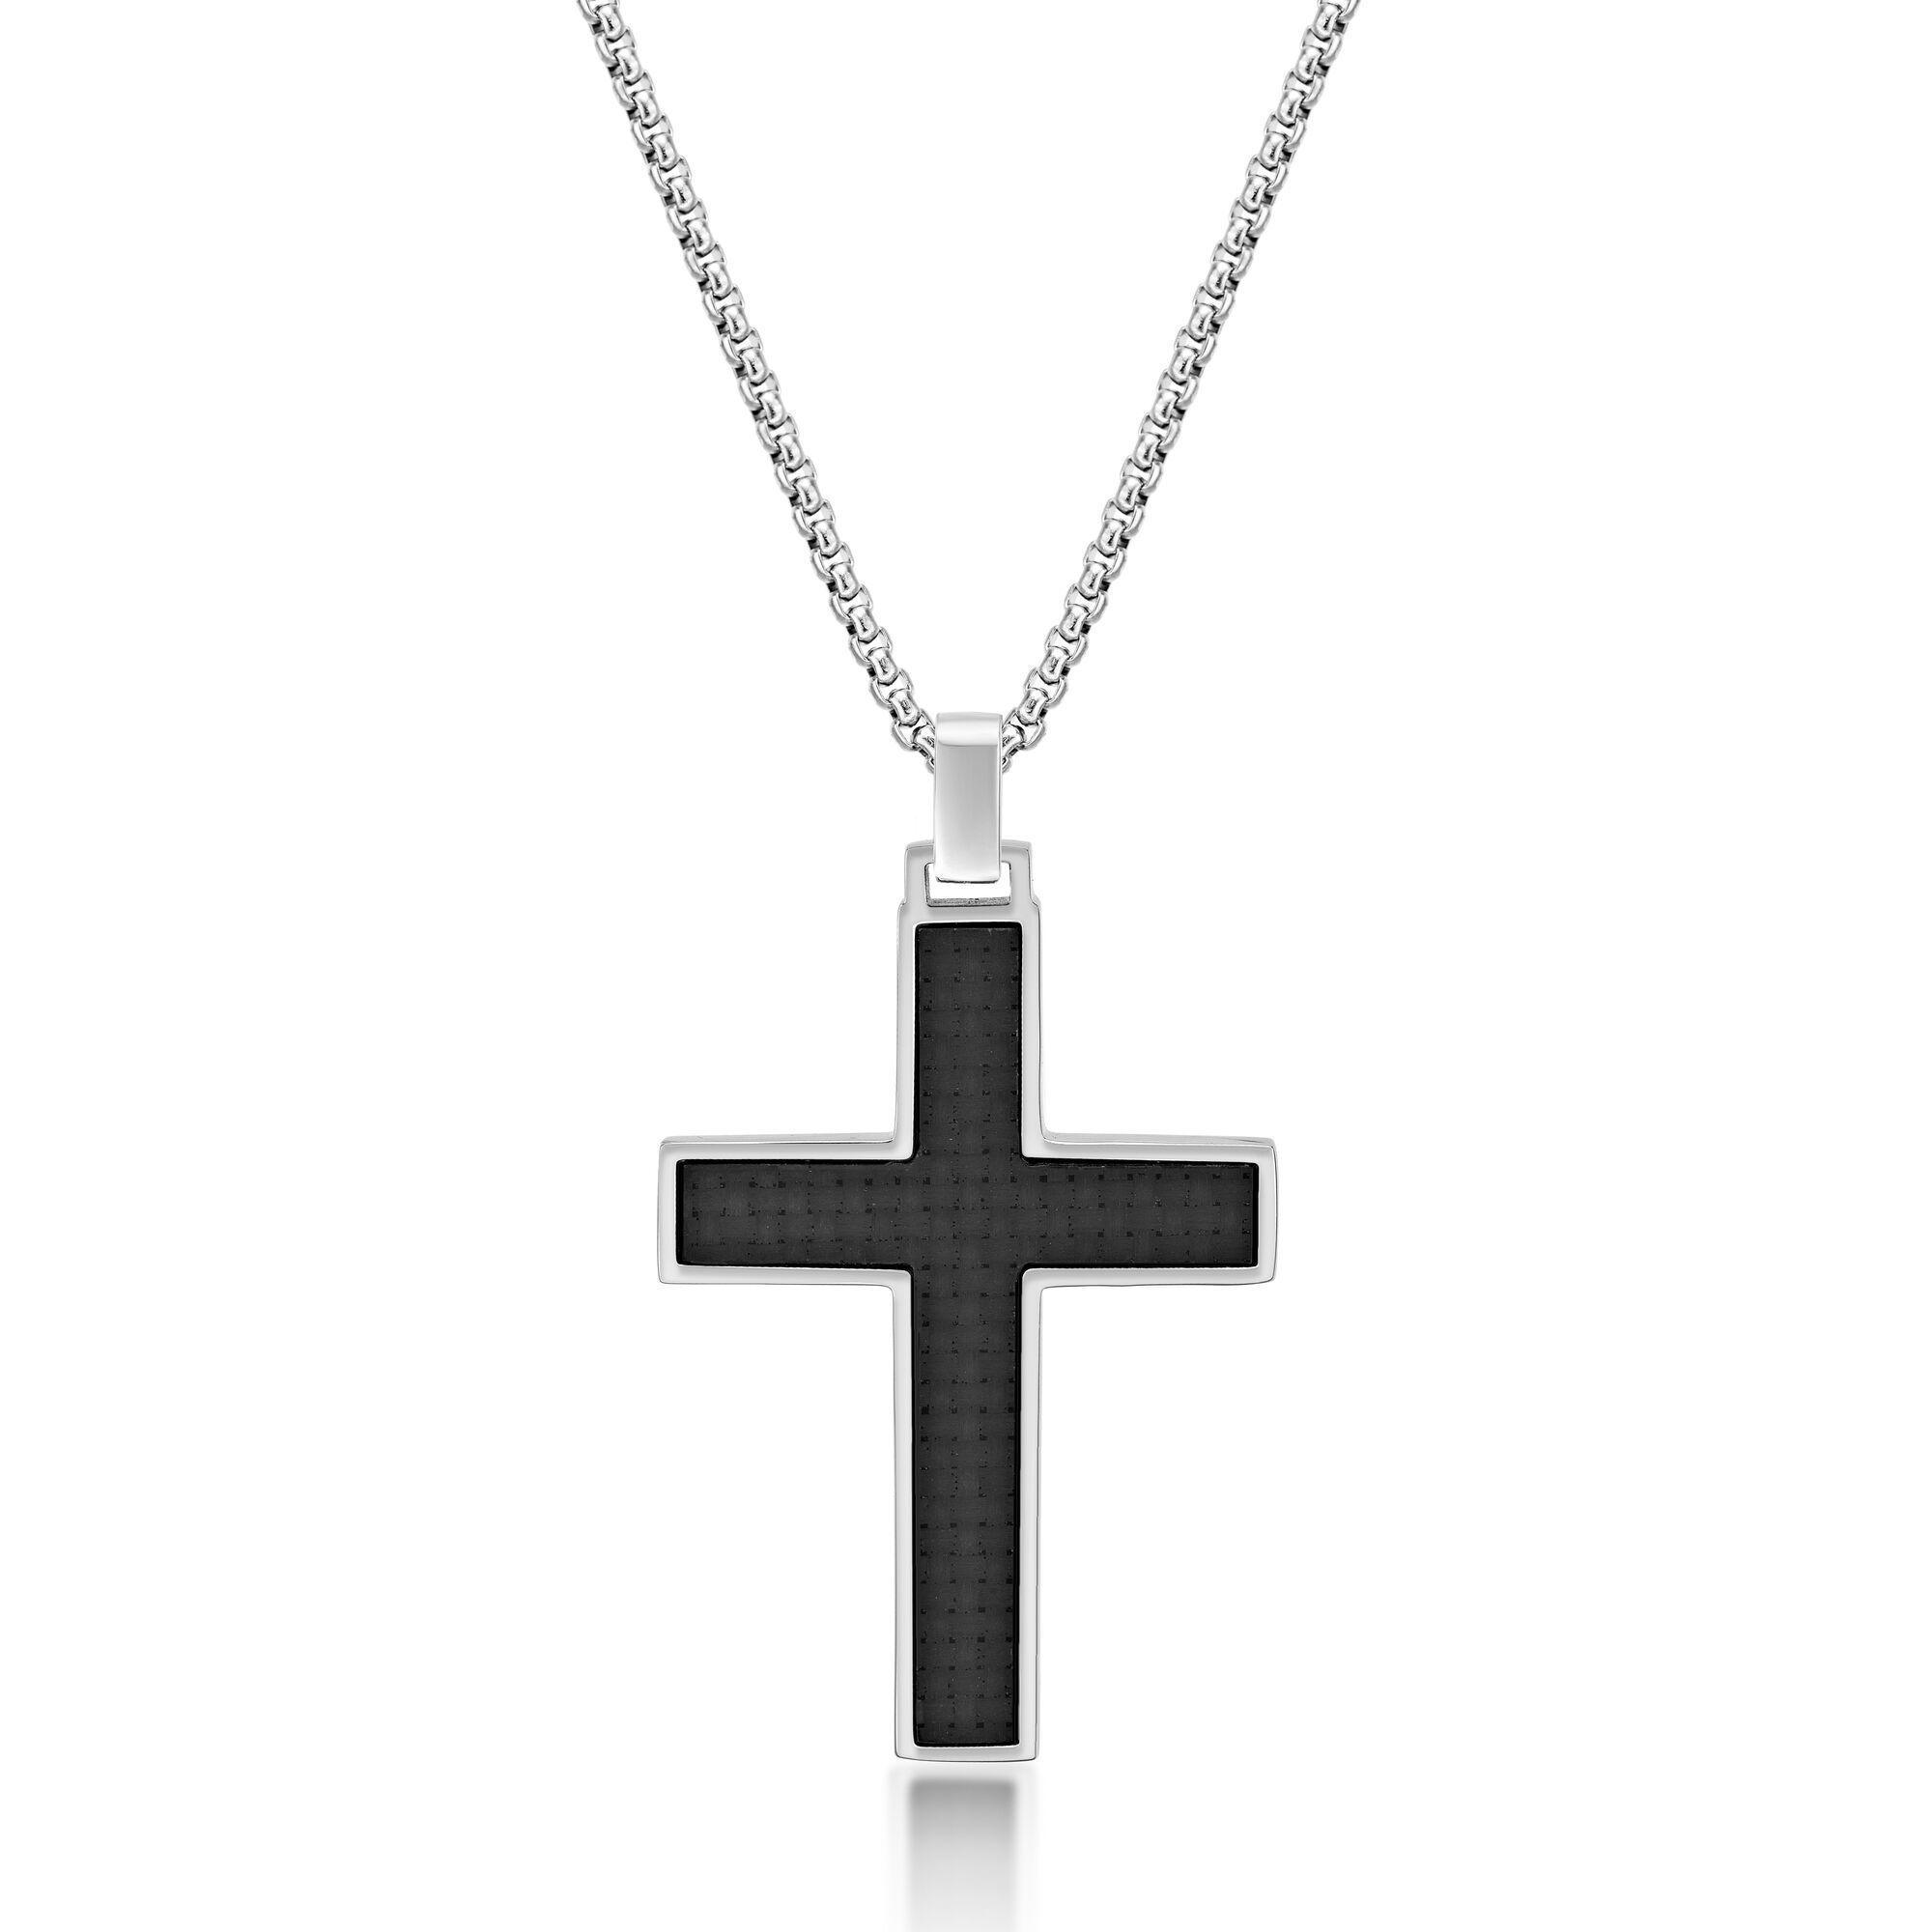 Stainless Steel Timeless Carbon Fiber Cross Pendant - 24 Inch Round Box Chain | Metro Jewelry